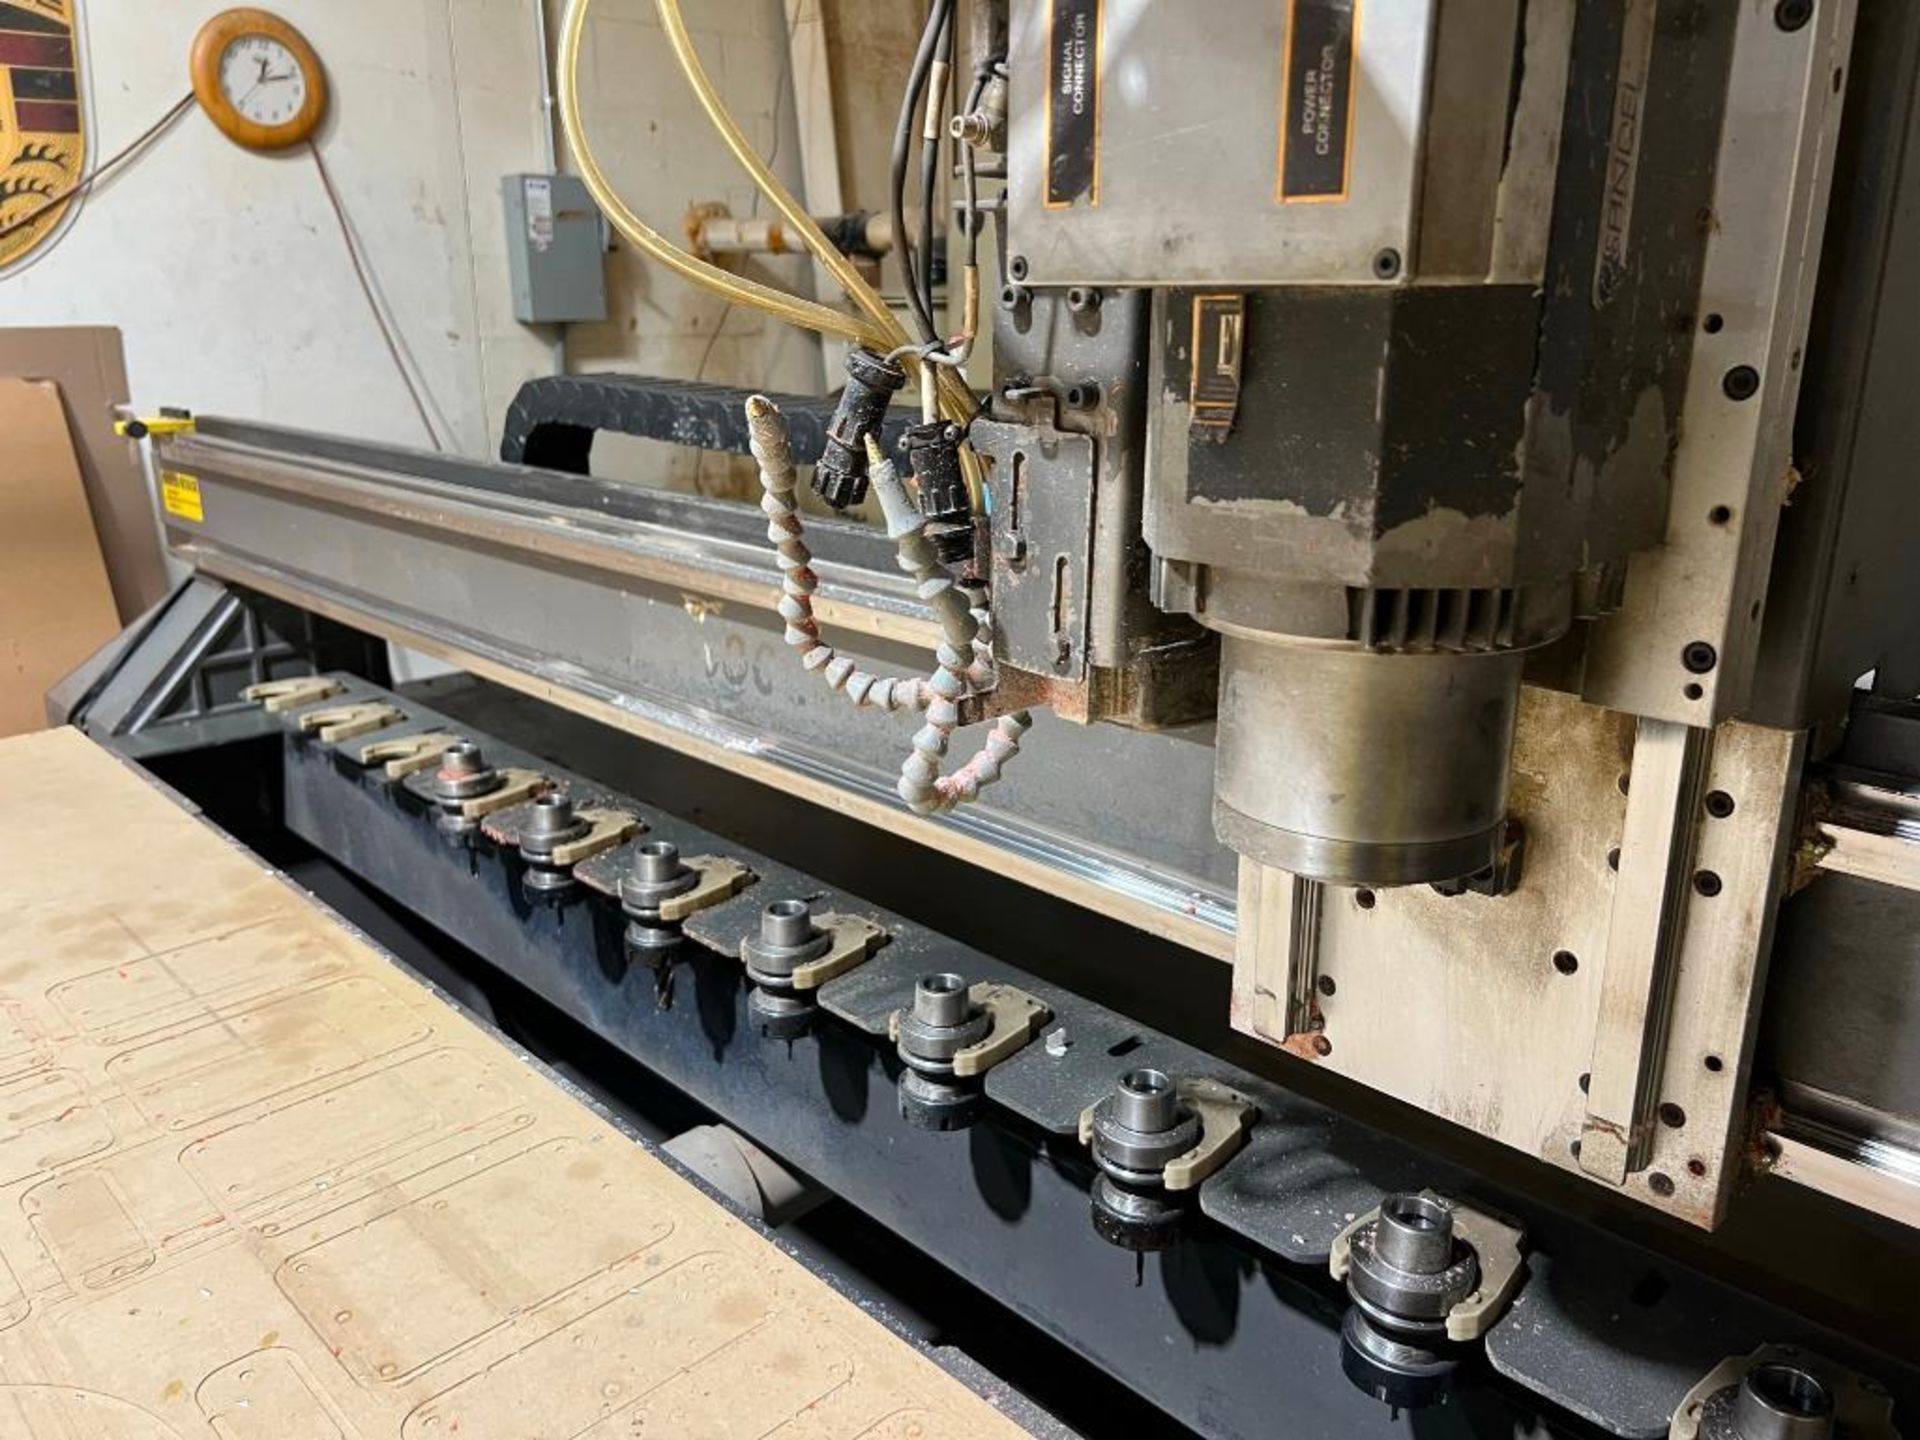 Multicam CNC Router Model 3305-R, S/N 3-305-R05361, 6' x 12' Table, with Tooling, Pendant Controls, - Image 6 of 16